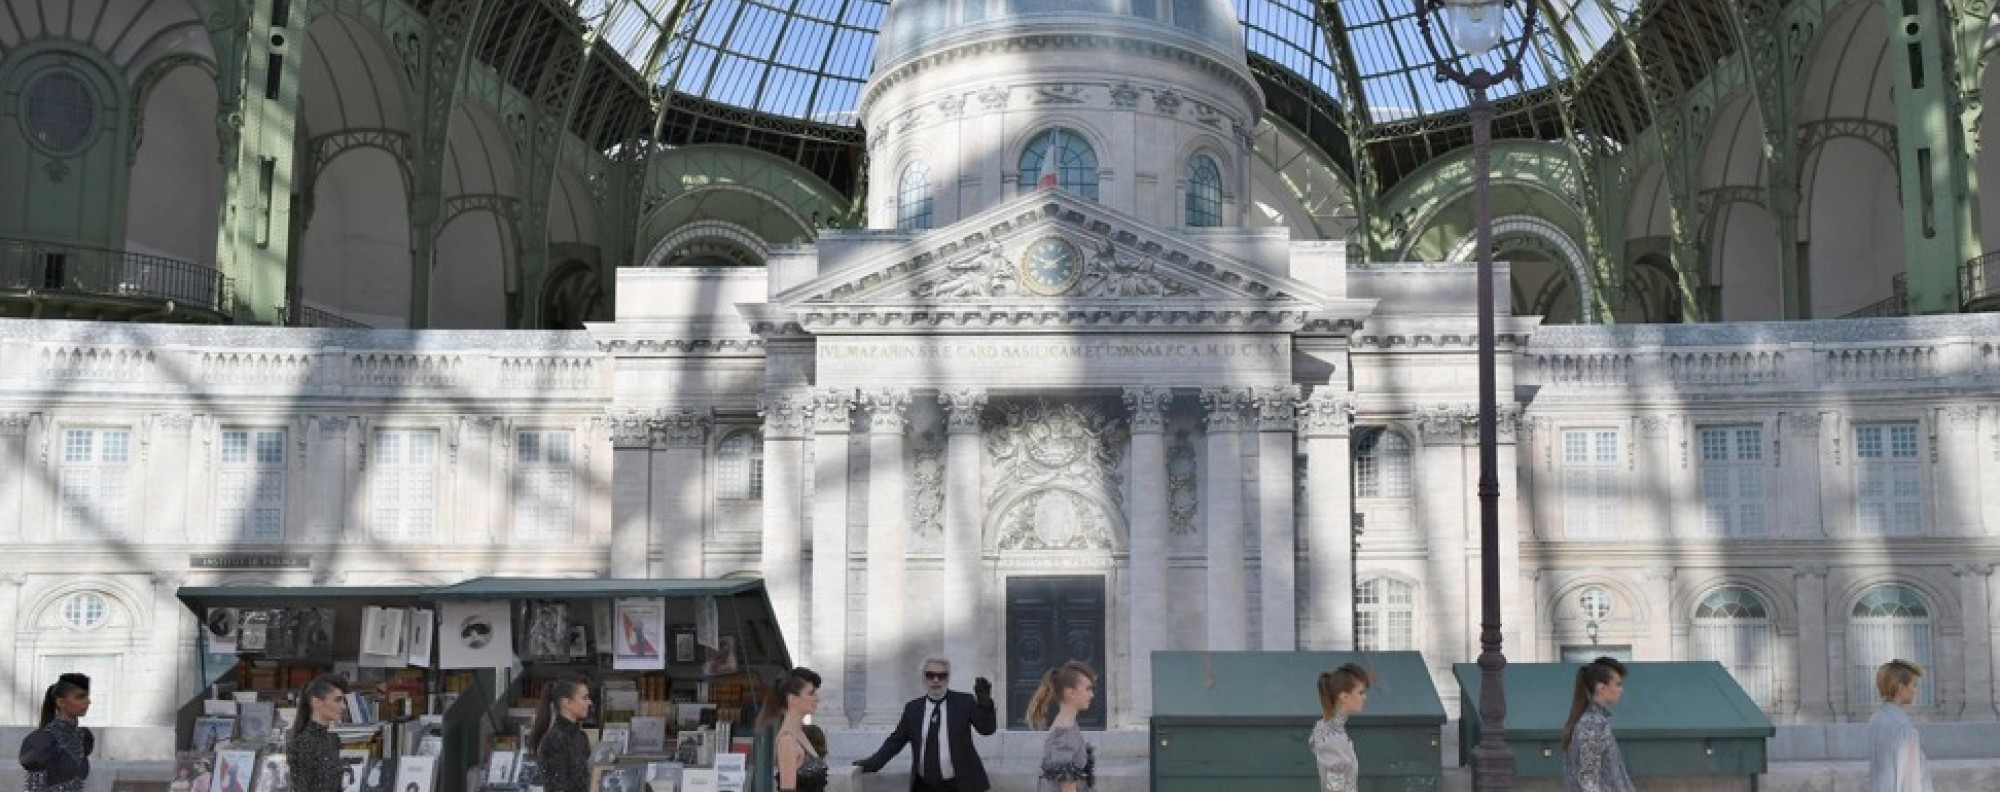 Karl Lagerfeld's Chanel Paris show is classily restrained